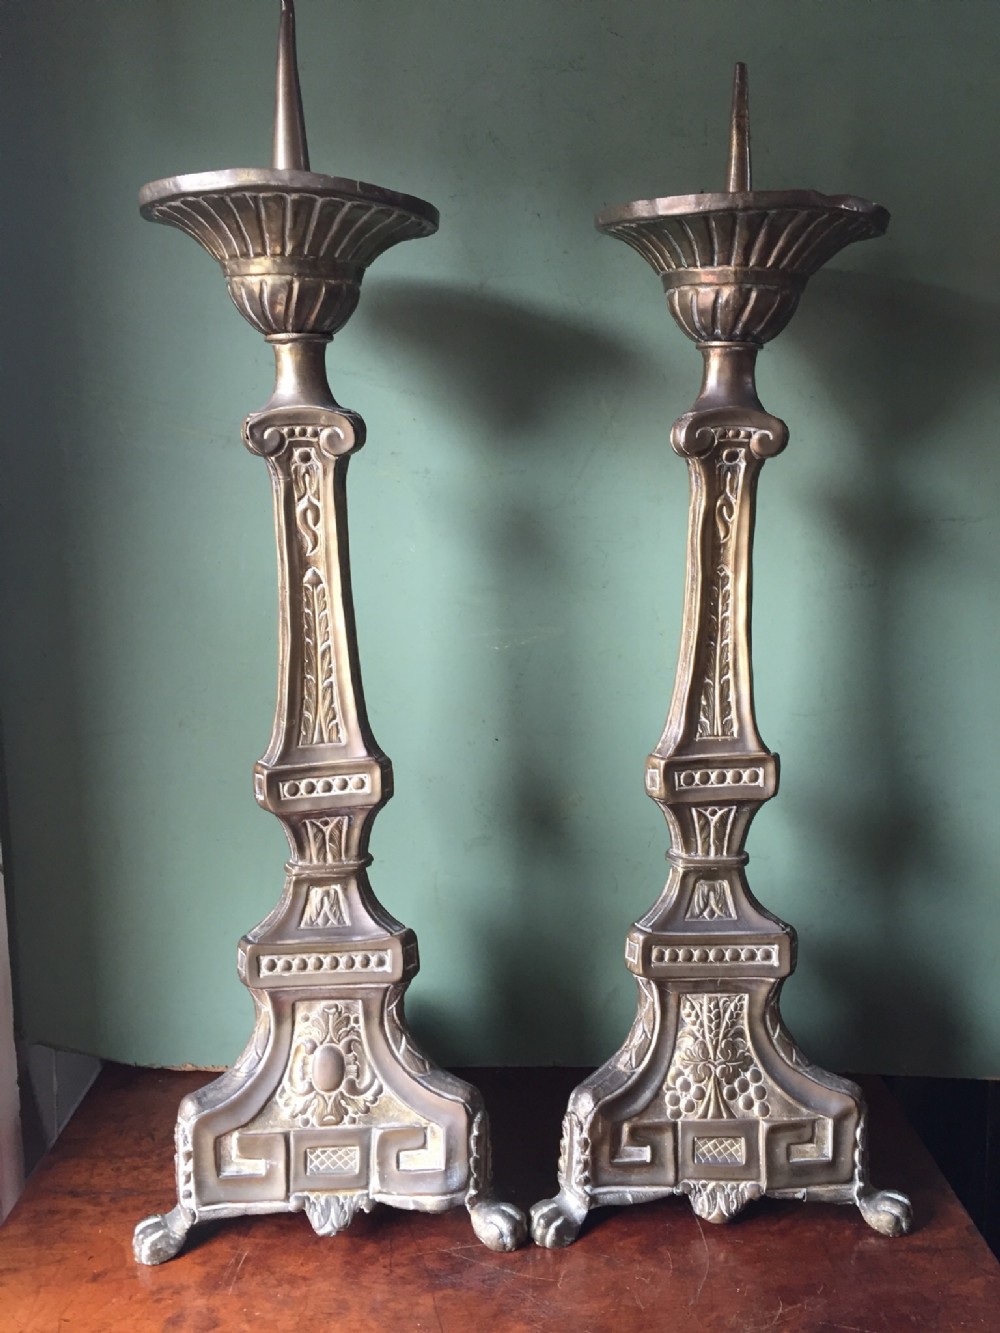 pair of c19th french pressed brass pricket candlesticks